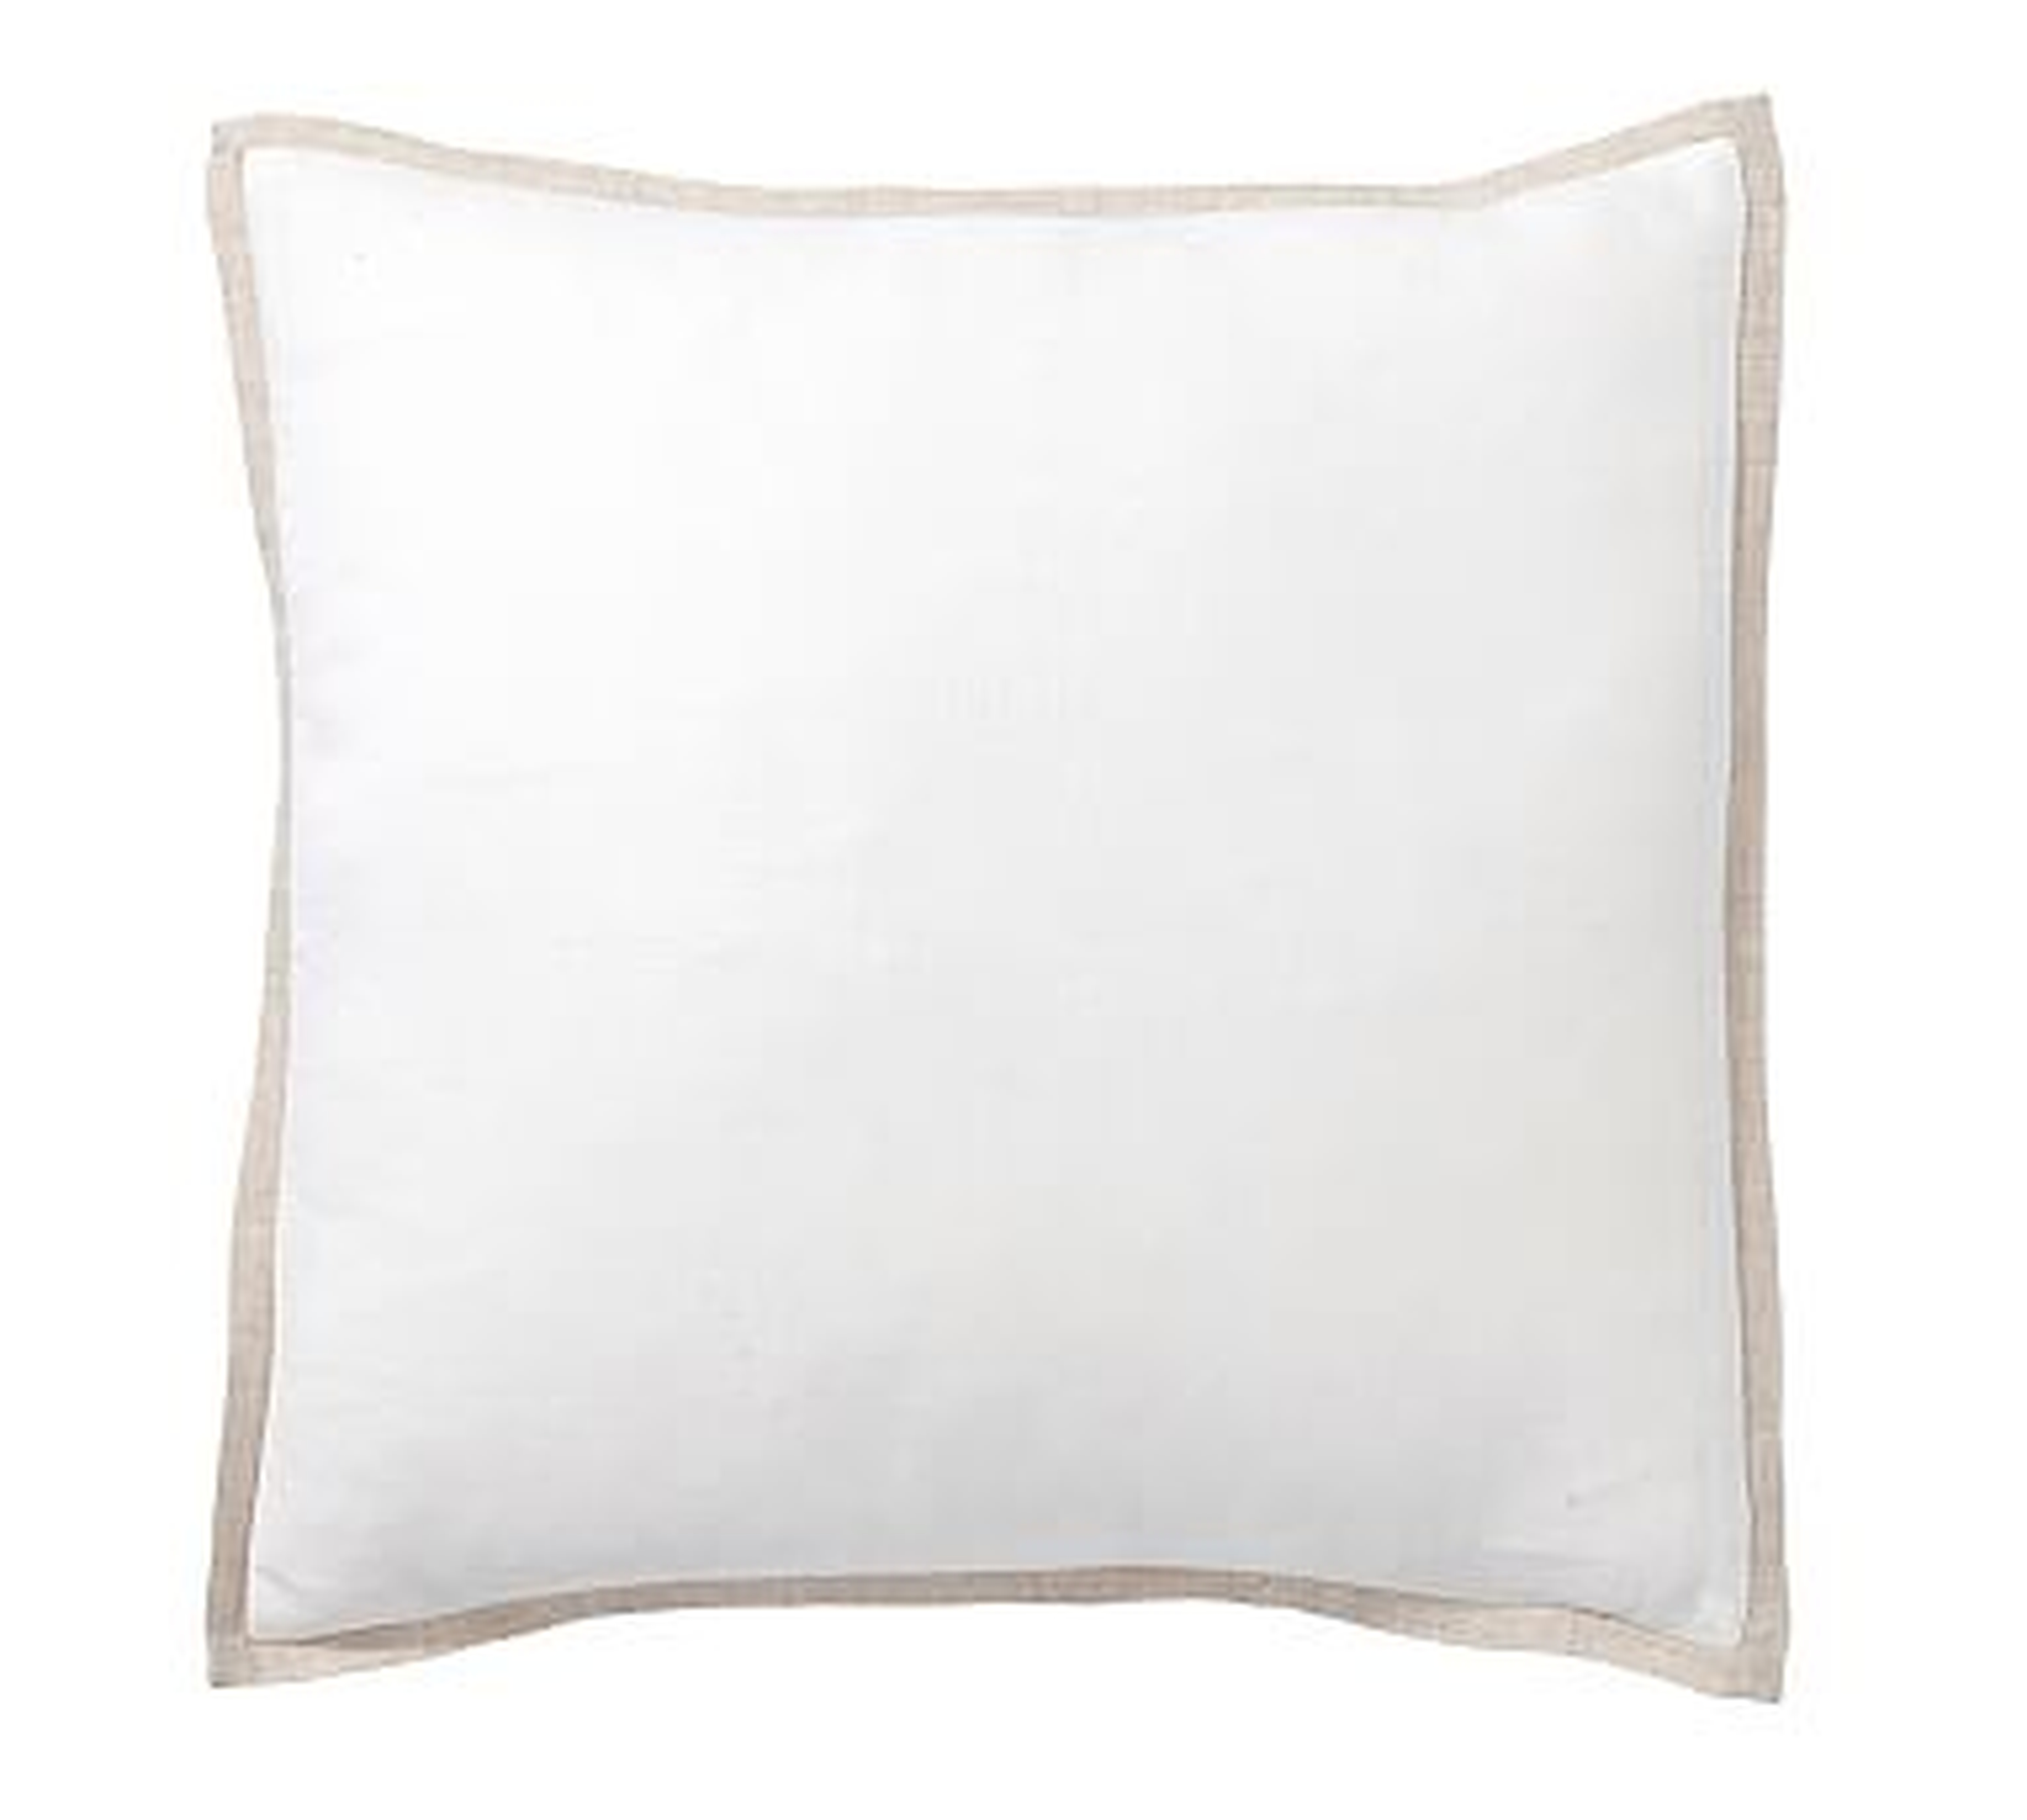 Belgian Flax Linen Contrast Flange Pillow Cover, 18", Smoke/White - Pottery Barn